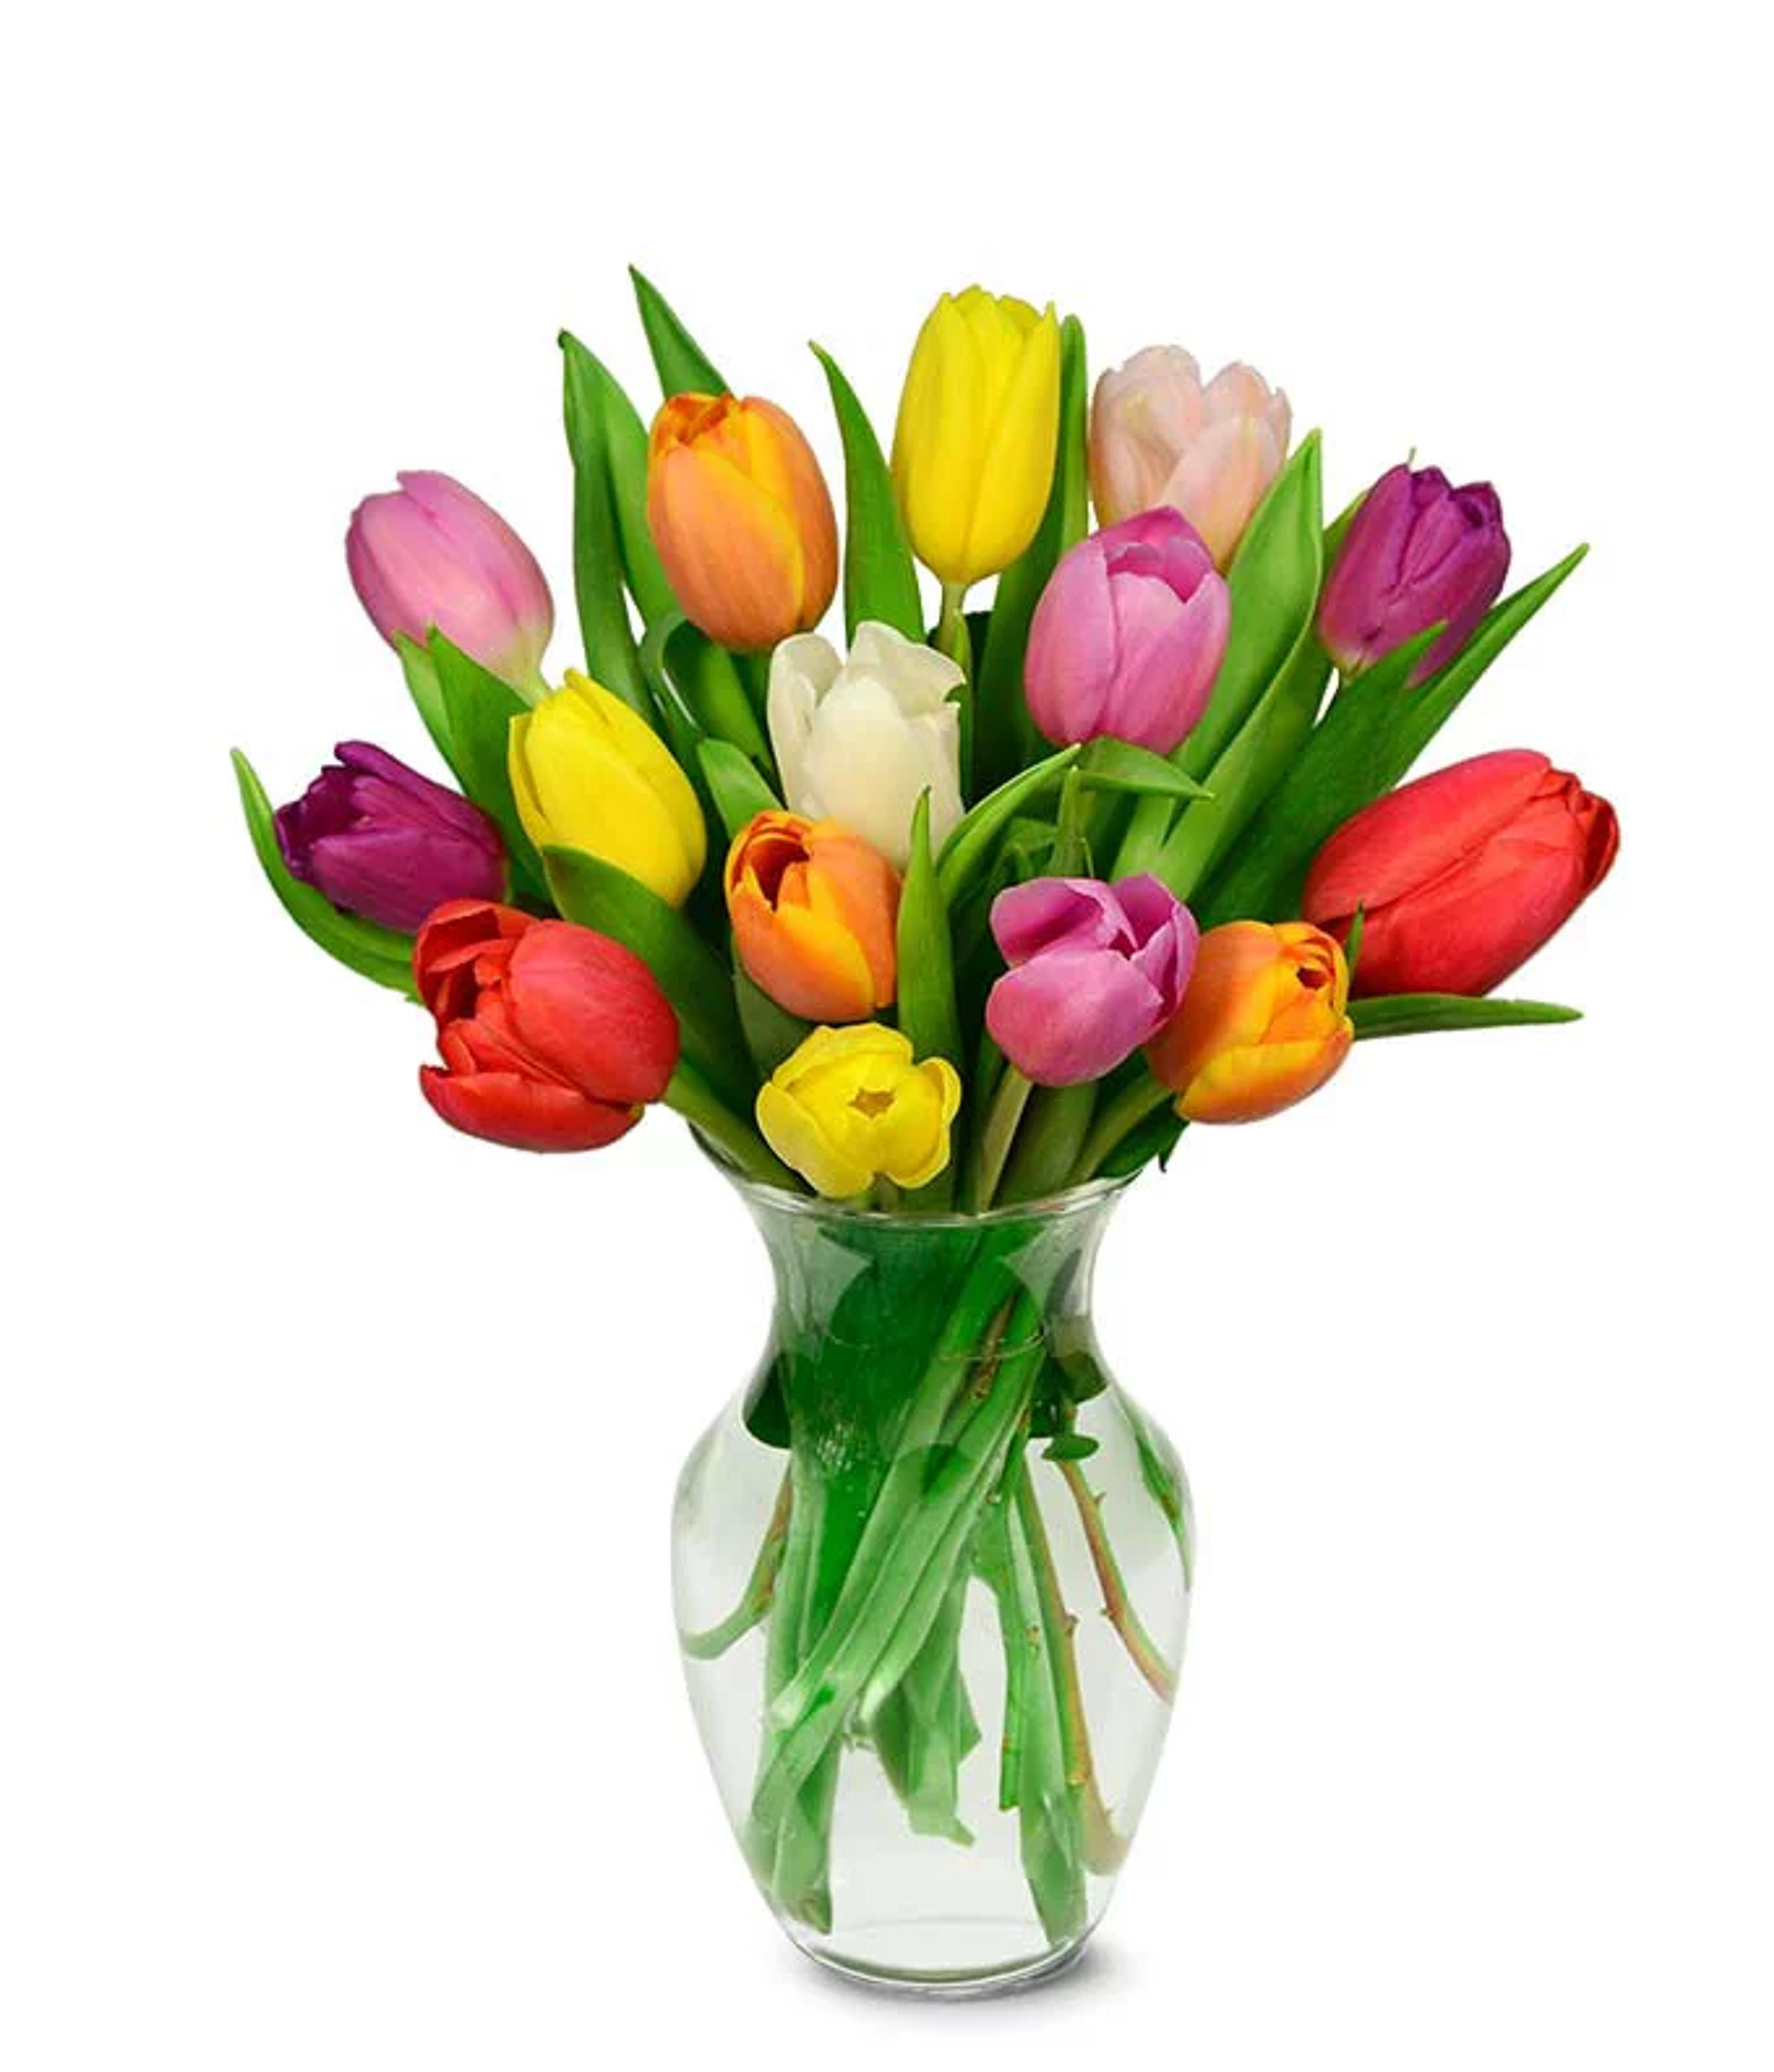 From You Flowers - Rainbow Tulip Bouquet - 15 Stems with Free Vase (Fresh Flowers) - Walmart.com